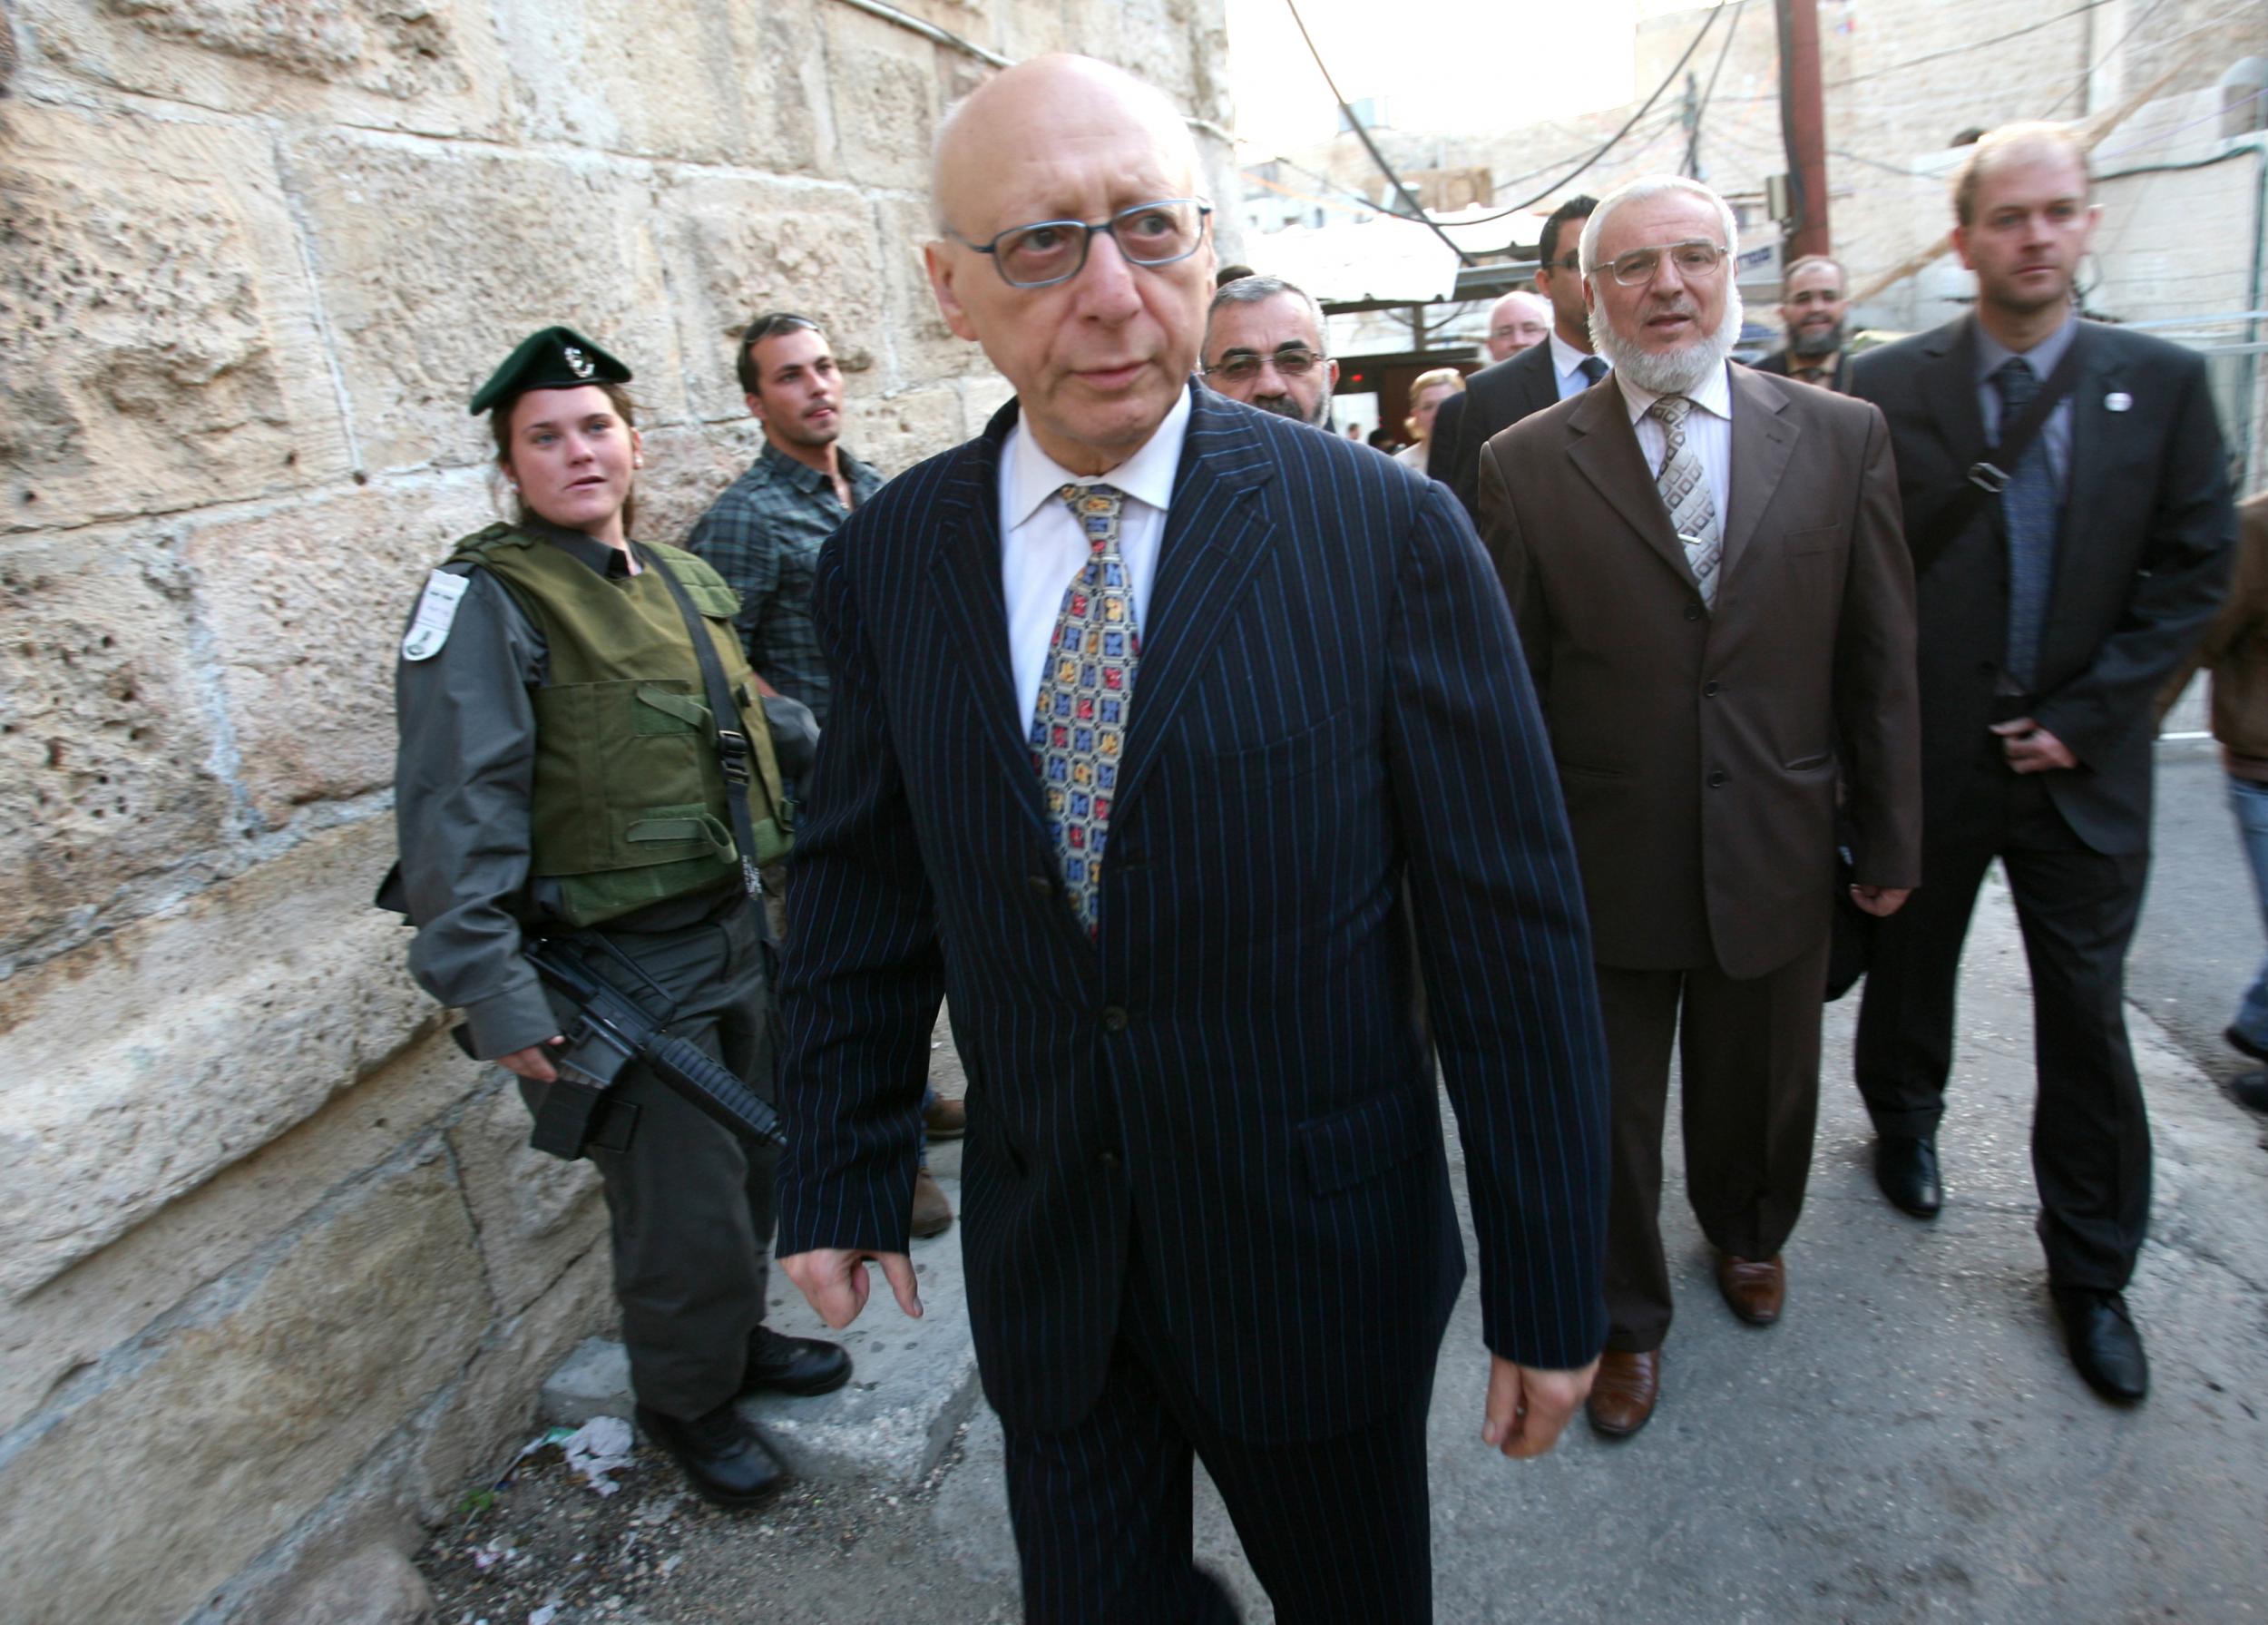 Gerald Kaufman MP on a visit to Israel in 2010